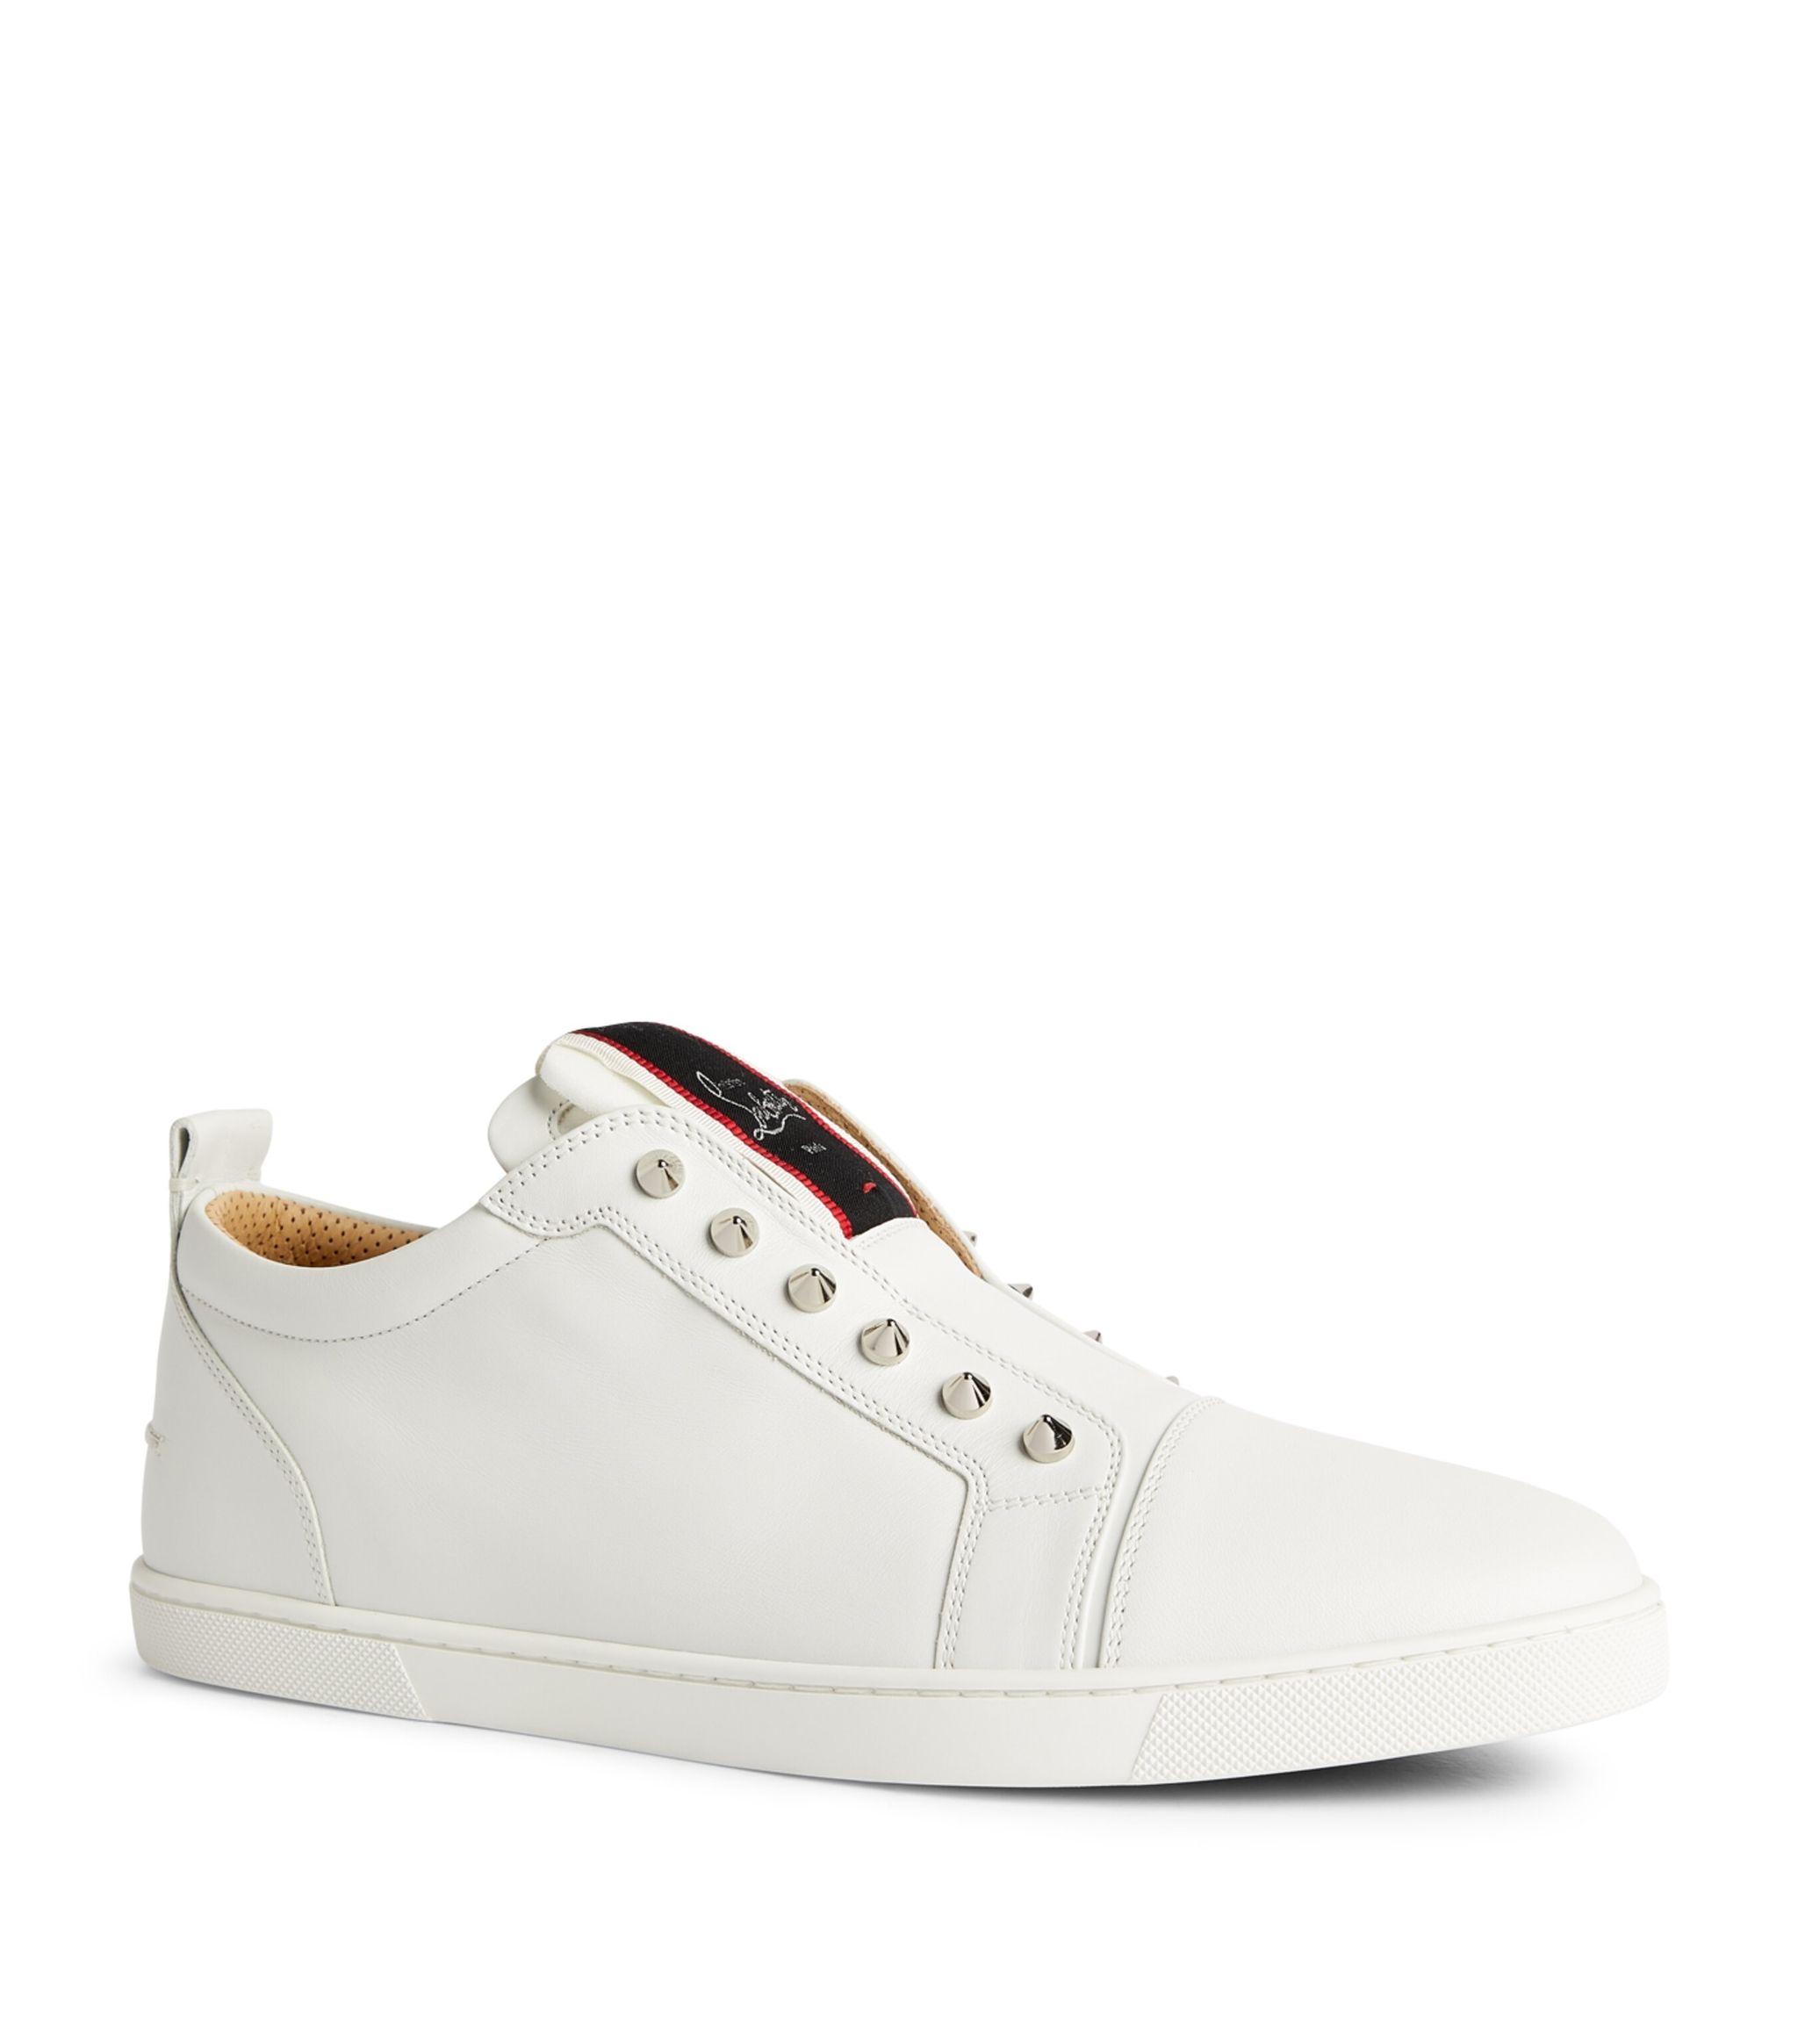 Christian Louboutin Leather Fav Fique A Vontade Flat Calf in White 